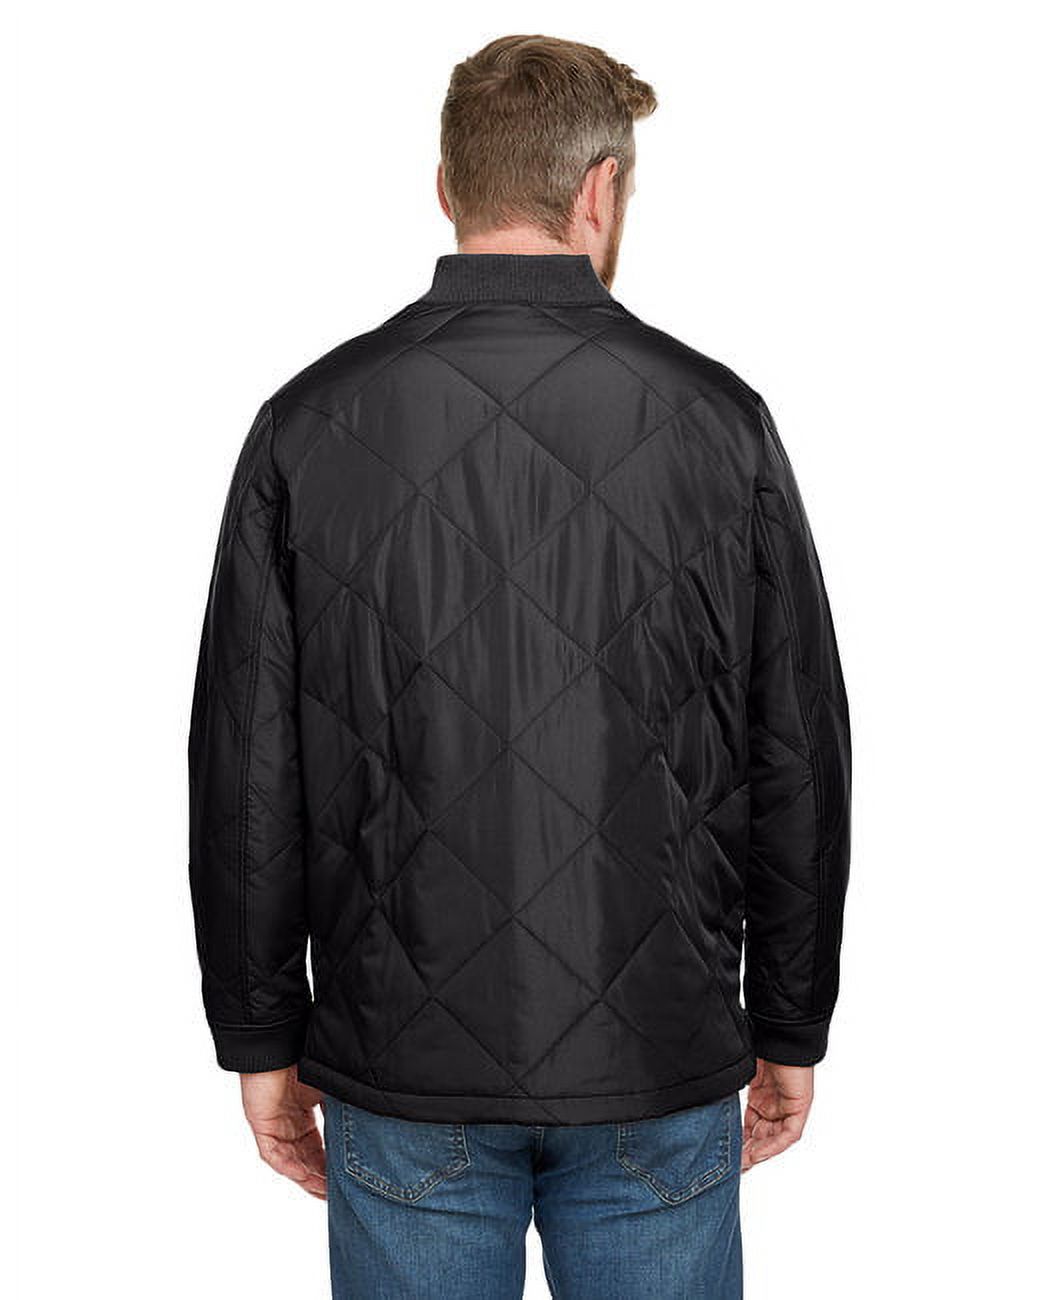 Adult Dockside Insulated Utility Jacket - DARK CHARCOAL - 5XL - image 2 of 3